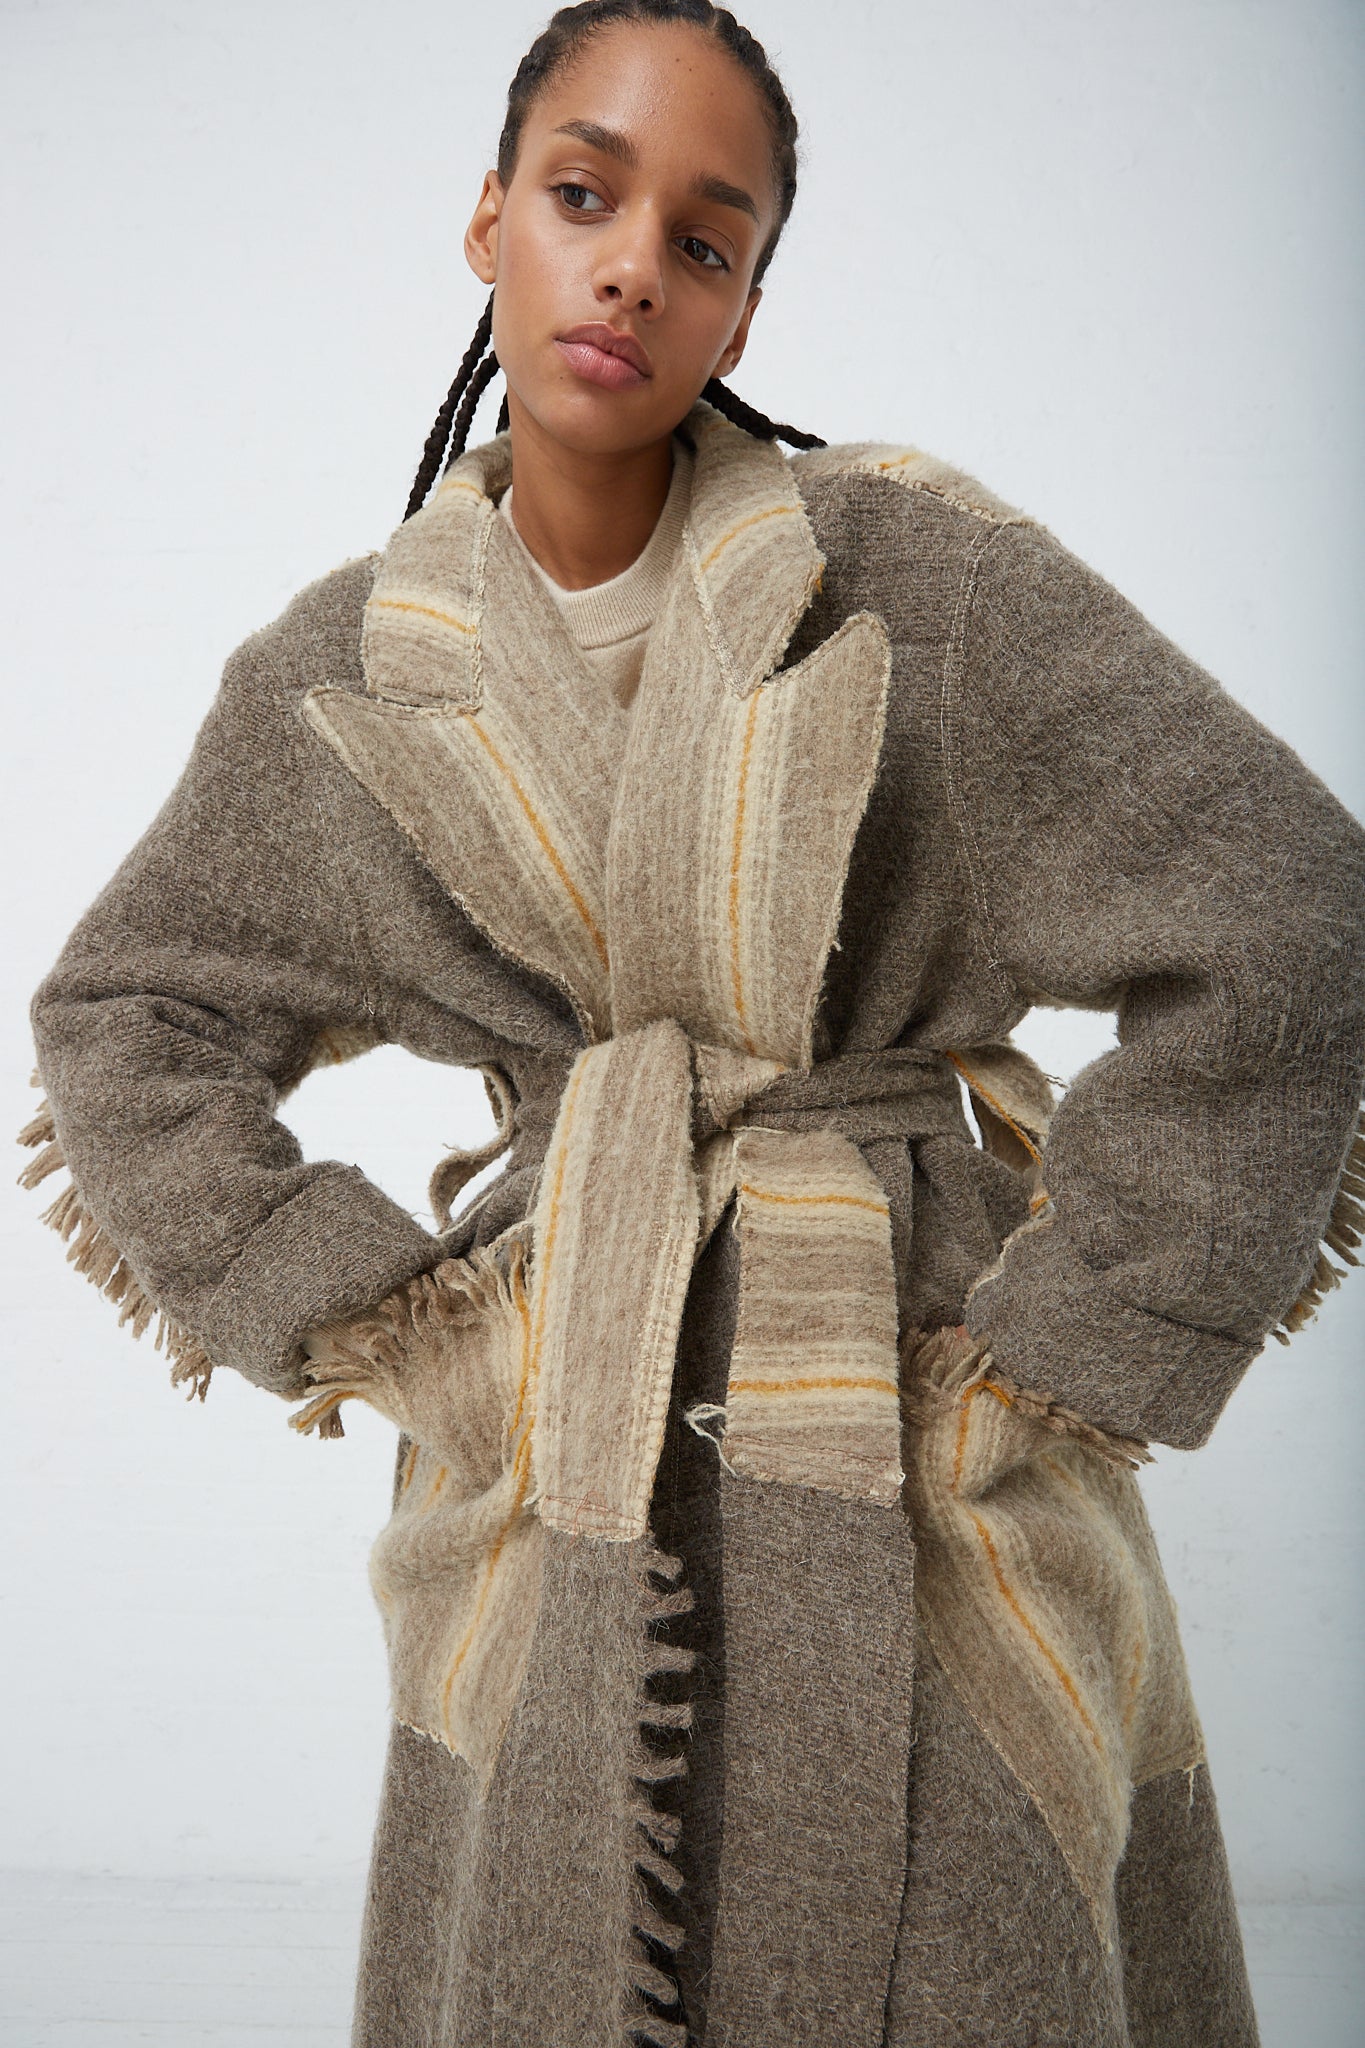 A woman wearing a Thank You Have A Good Day Wool Blanket Swing Trench.